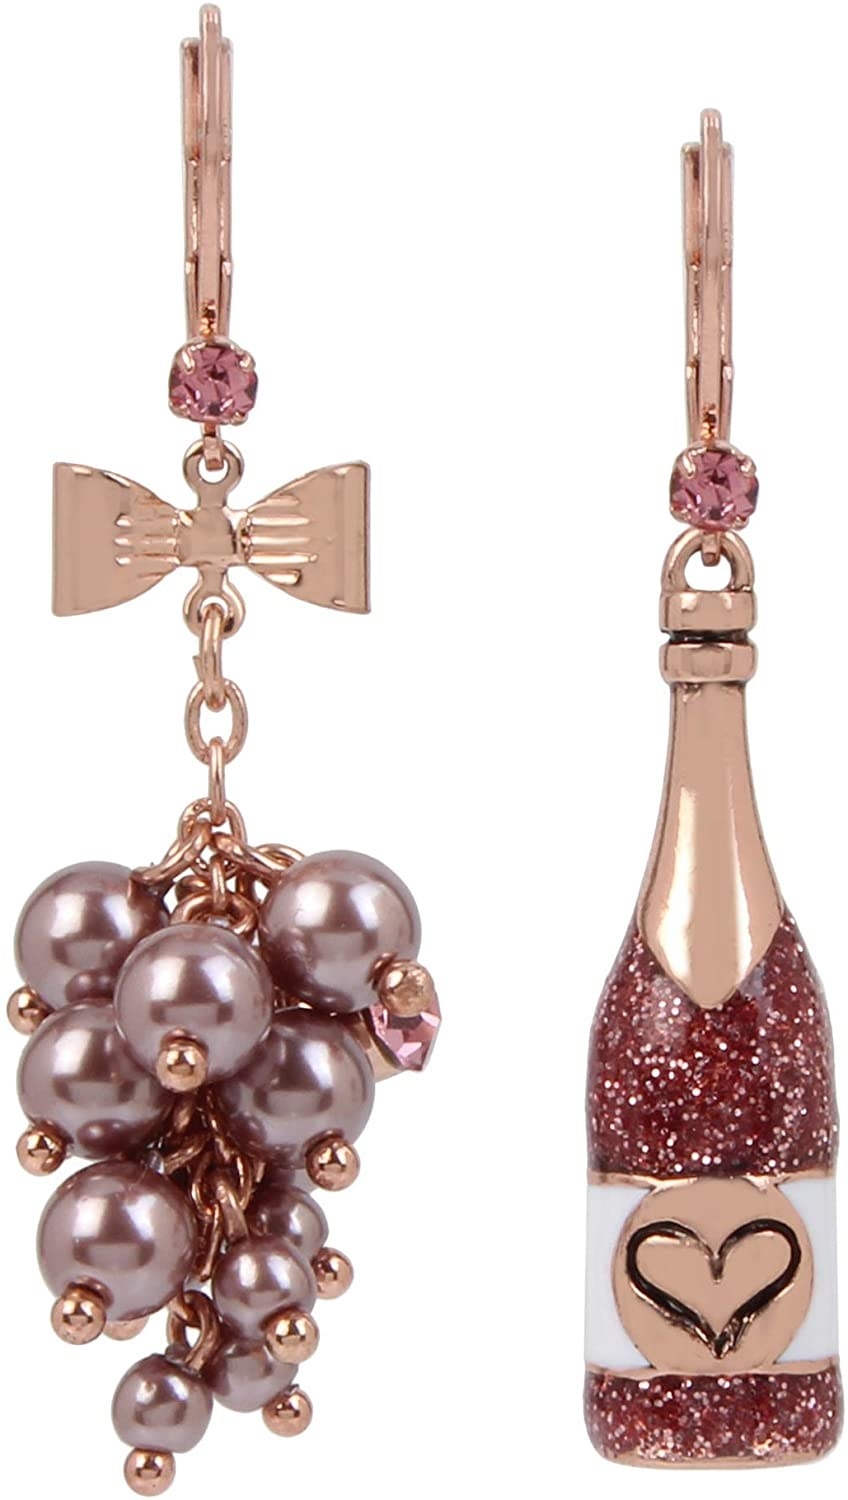 The rose gold and pink rhinestone drop earrings, one of which has rose colored baubles that look like bubbles, and one that&#x27;s shaped like a glittery rosé bottle